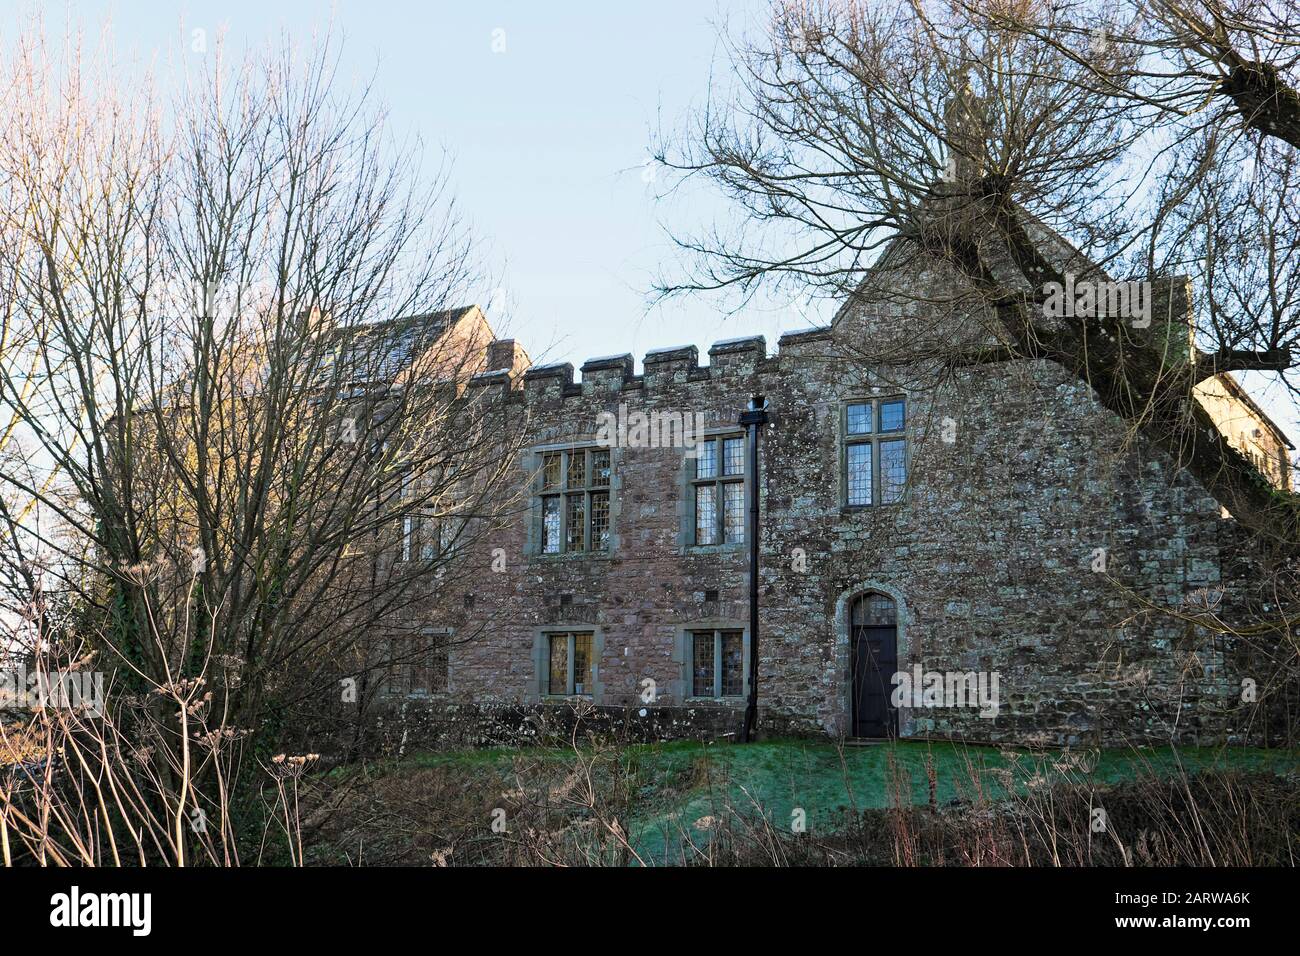 St Briavels Castle (12th Century) now a YHA hostel on the edge of the Forest of Dean near Lydney in Gloucestershire, England, UK  KATHY DEWITT Stock Photo